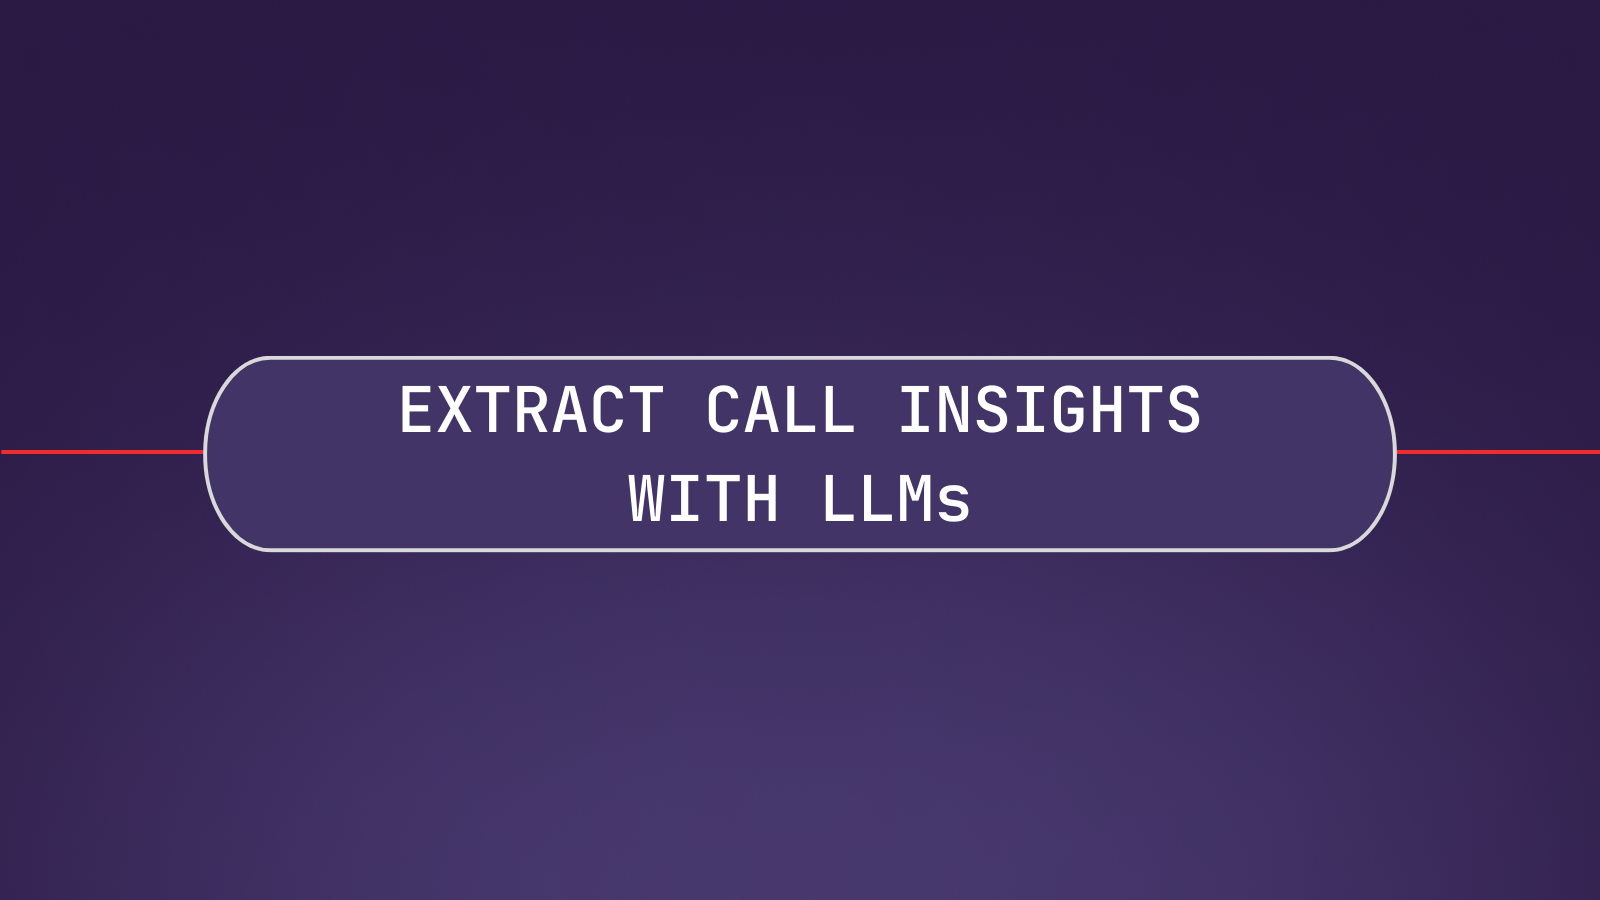 Extract phone call insights with LLMs in Python